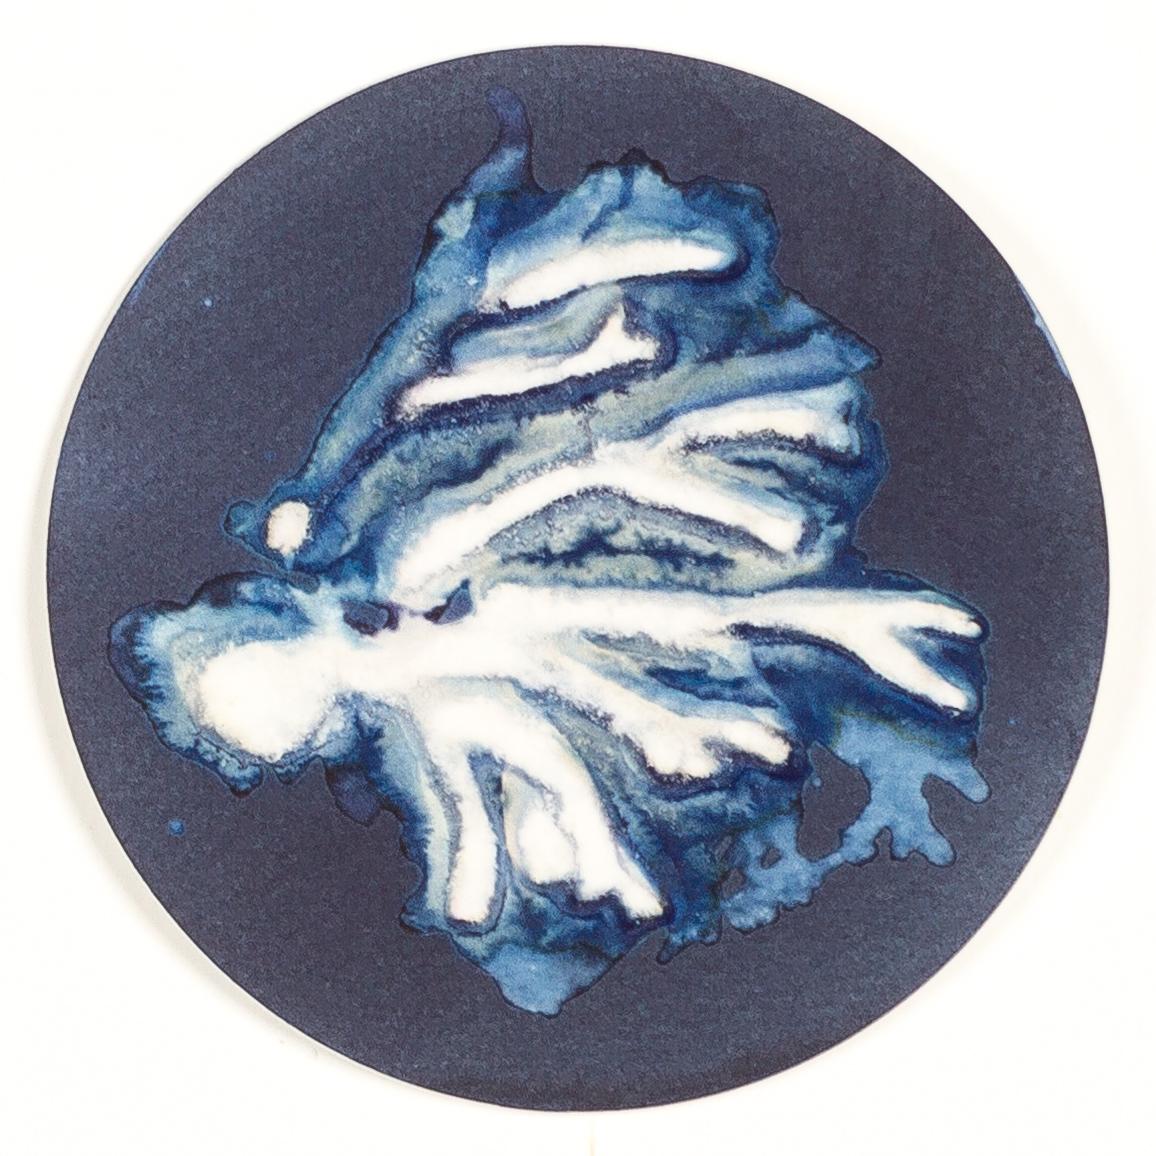 Algas 75, 83 Y 26. Cyanotype photograhs mounted in high resistance glass dish For Sale 2